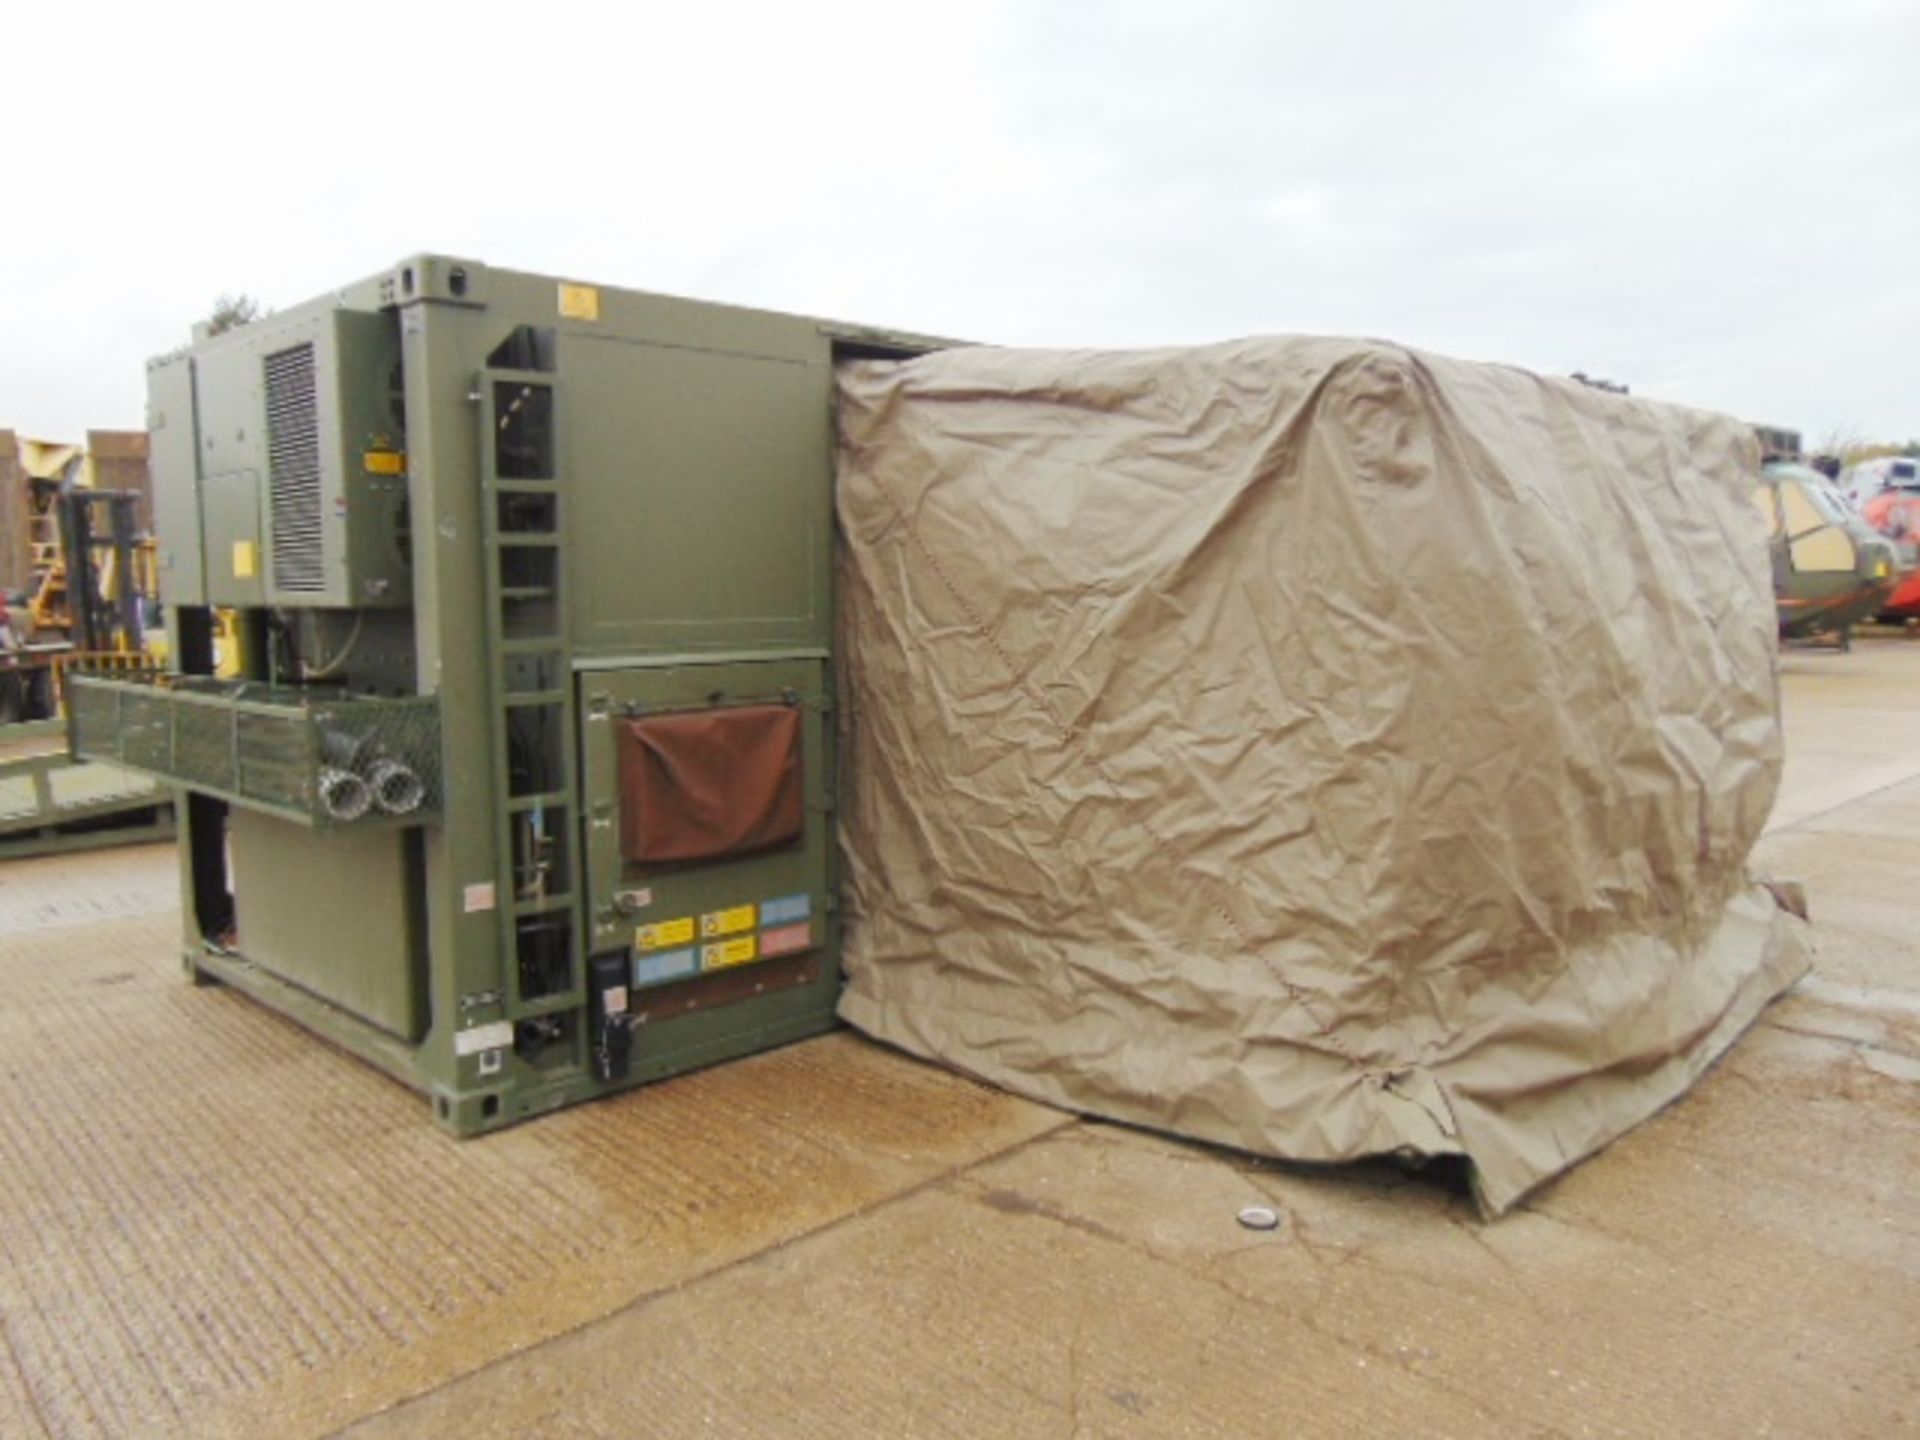 Containerised Insys Ltd Integrated Biological Detection/Decontamination System (IBDS) - Image 16 of 66